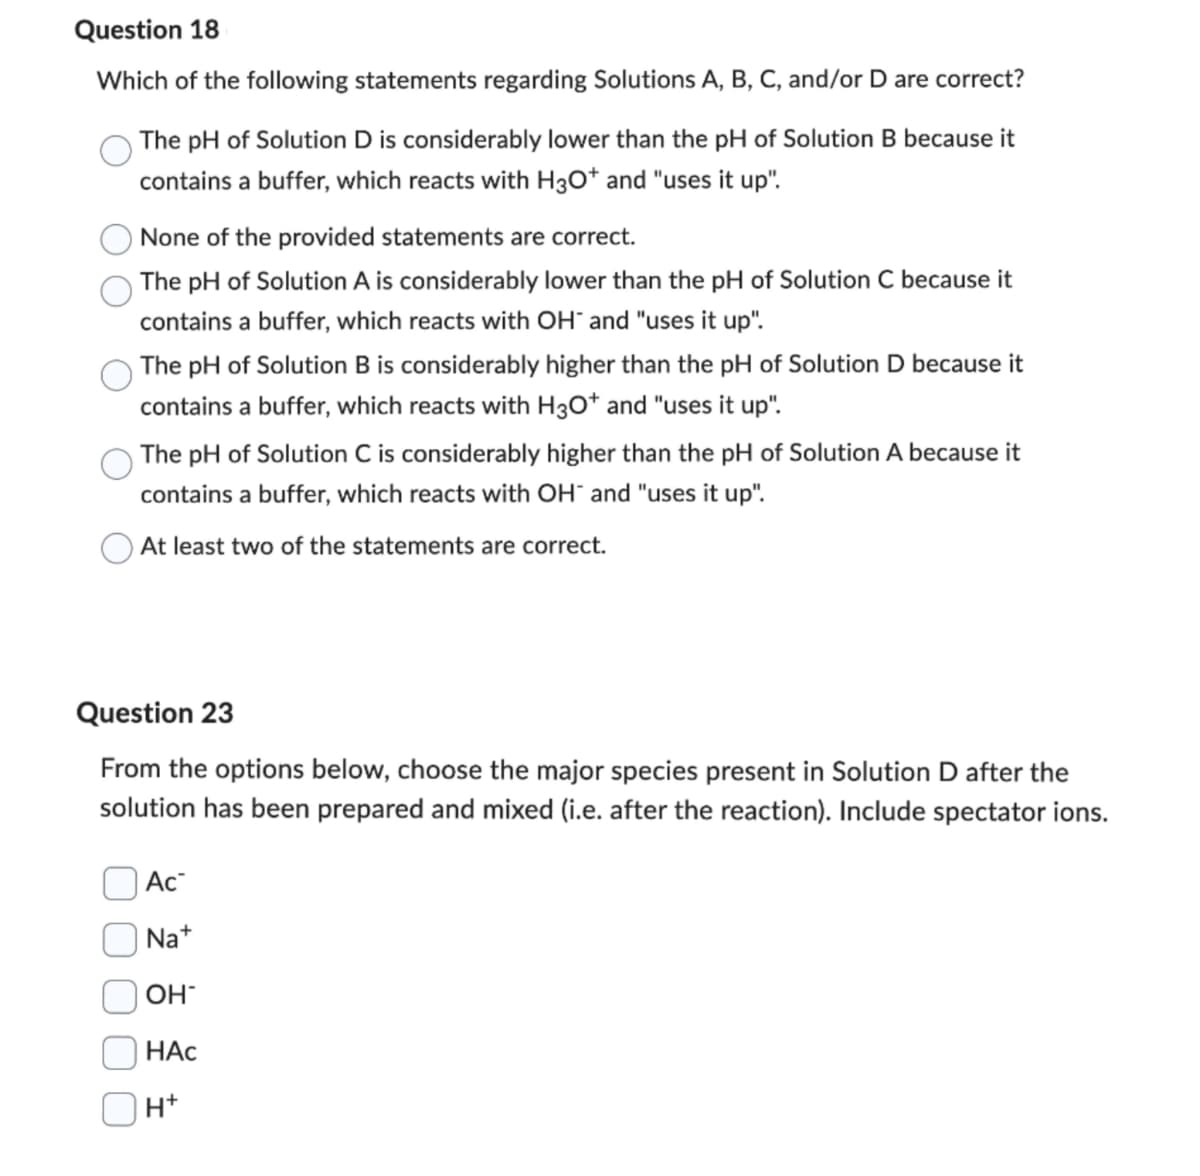 Question 18
Which of the following statements regarding Solutions A, B, C, and/or D are correct?
The pH of Solution D is considerably lower than the pH of Solution B because it
contains a buffer, which reacts with H3O+ and "uses it up".
None of the provided statements are correct.
The pH of Solution A is considerably lower than the pH of Solution C because it
contains a buffer, which reacts with OH" and "uses it up".
The pH of Solution B is considerably higher than the pH of Solution D because it
contains a buffer, which reacts with H3O+ and "uses it up".
The pH of Solution C is considerably higher than the pH of Solution A because it
contains a buffer, which reacts with OH and "uses it up".
At least two of the statements are correct.
Question 23
From the options below, choose the major species present in Solution D after the
solution has been prepared and mixed (i.e. after the reaction). Include spectator ions.
Ac
Na+
OH
HAC
H+